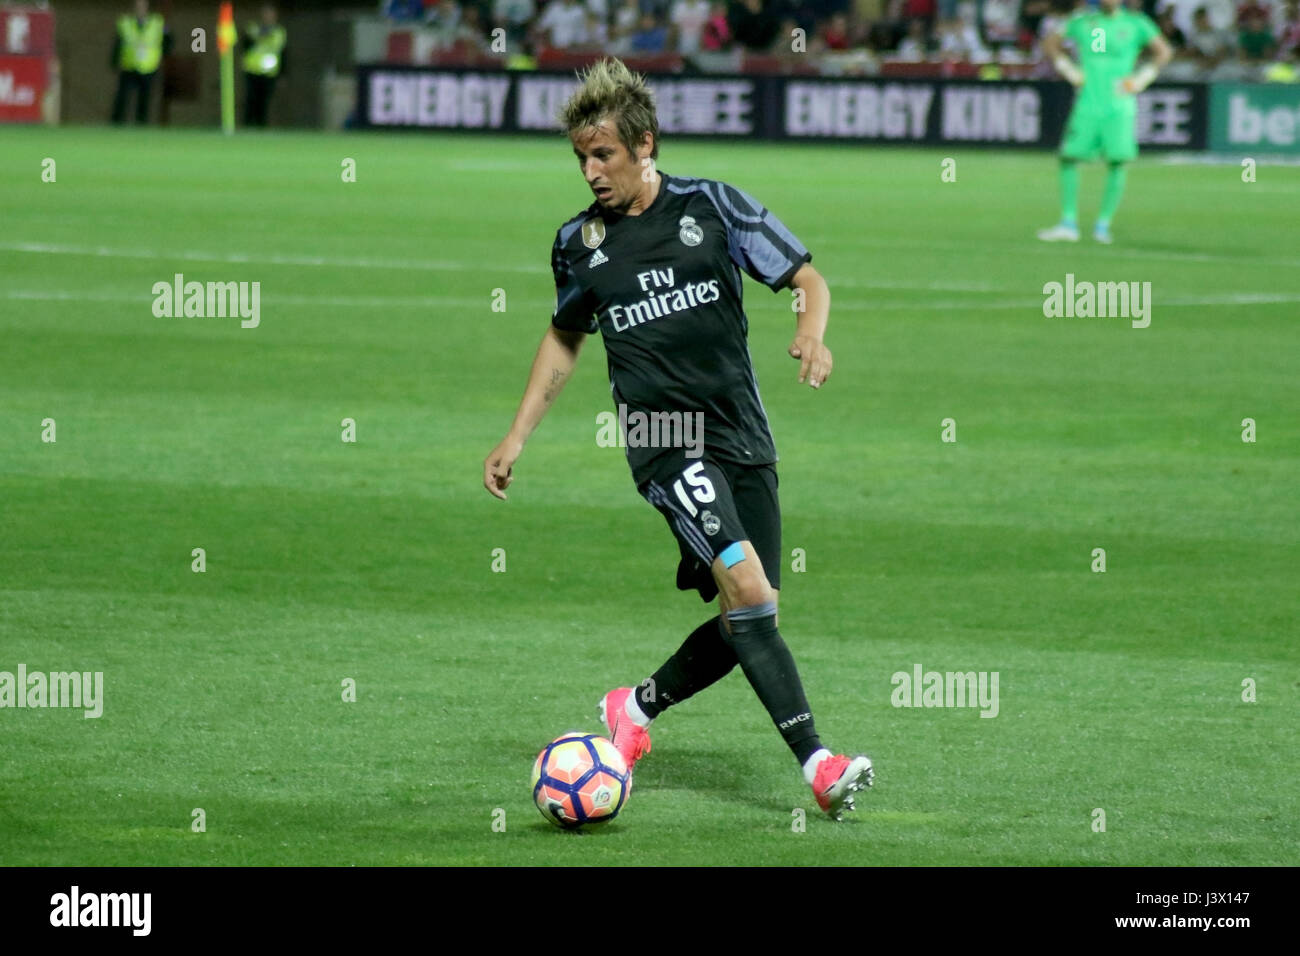 Granada, Spain. May 6, 2017 - Fabio Coentrao with the ball. Real Madrid defeated Granada 0-4 with goals scored by James Rodriguez (3 and 10 minute) and Alvaro Morata (30 and 35 minute). Matchday 36 game played in Los Nuevos Carmenes Stadium. Photo by Jose Velasco | PHOTO MEDIA EXPRESS Stock Photo